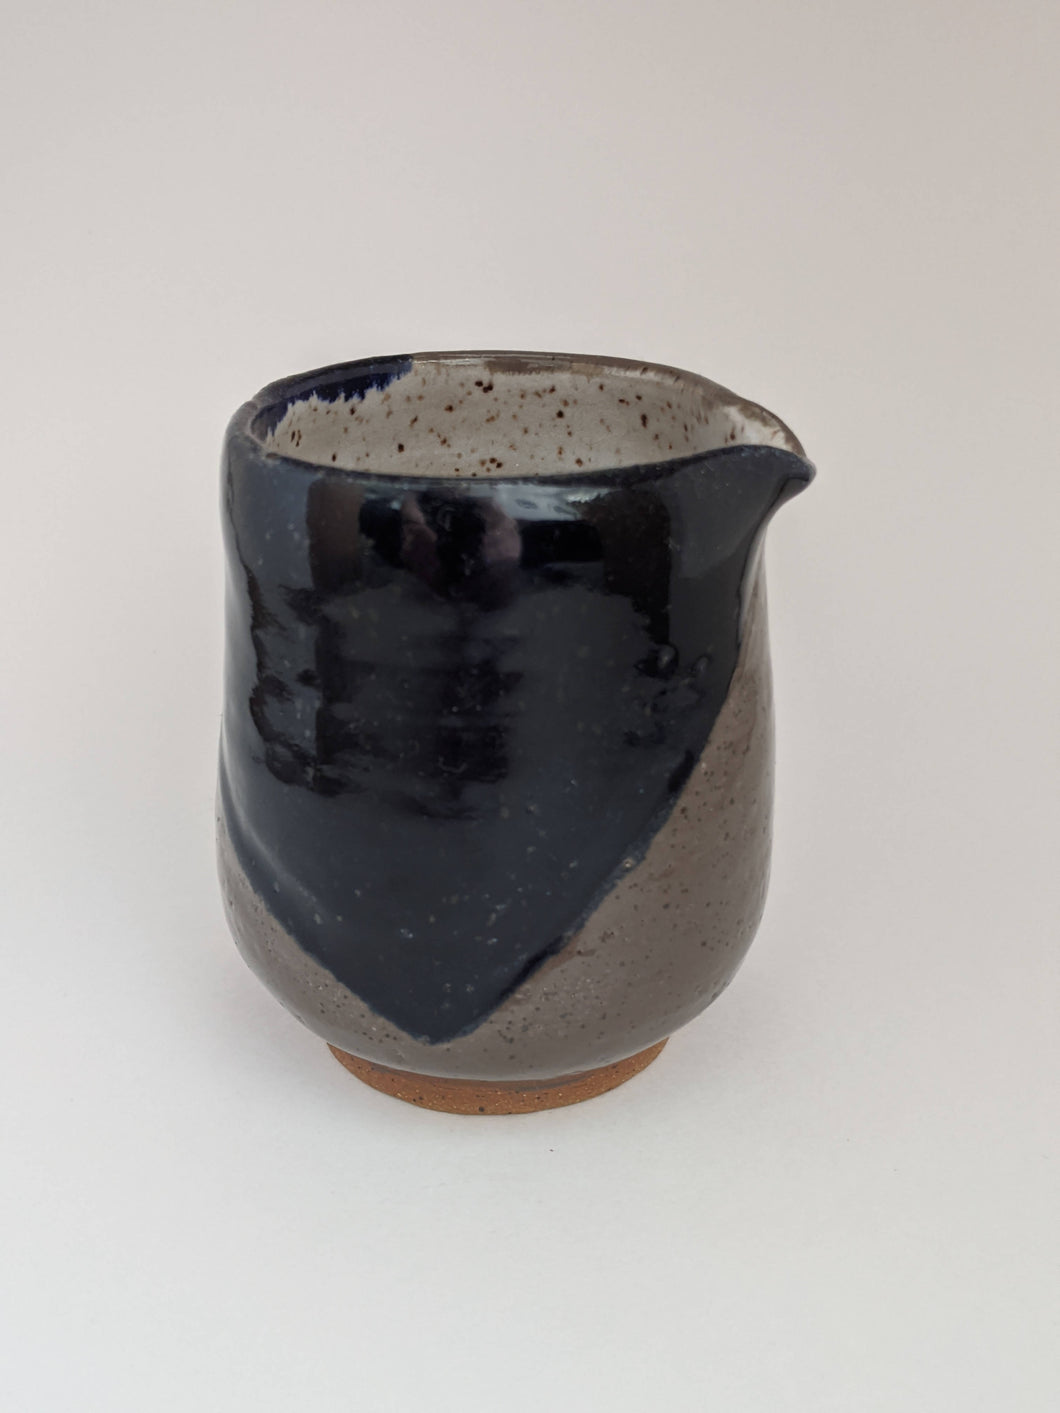 Speckled white, grey and navy Ceramic vessel with spout